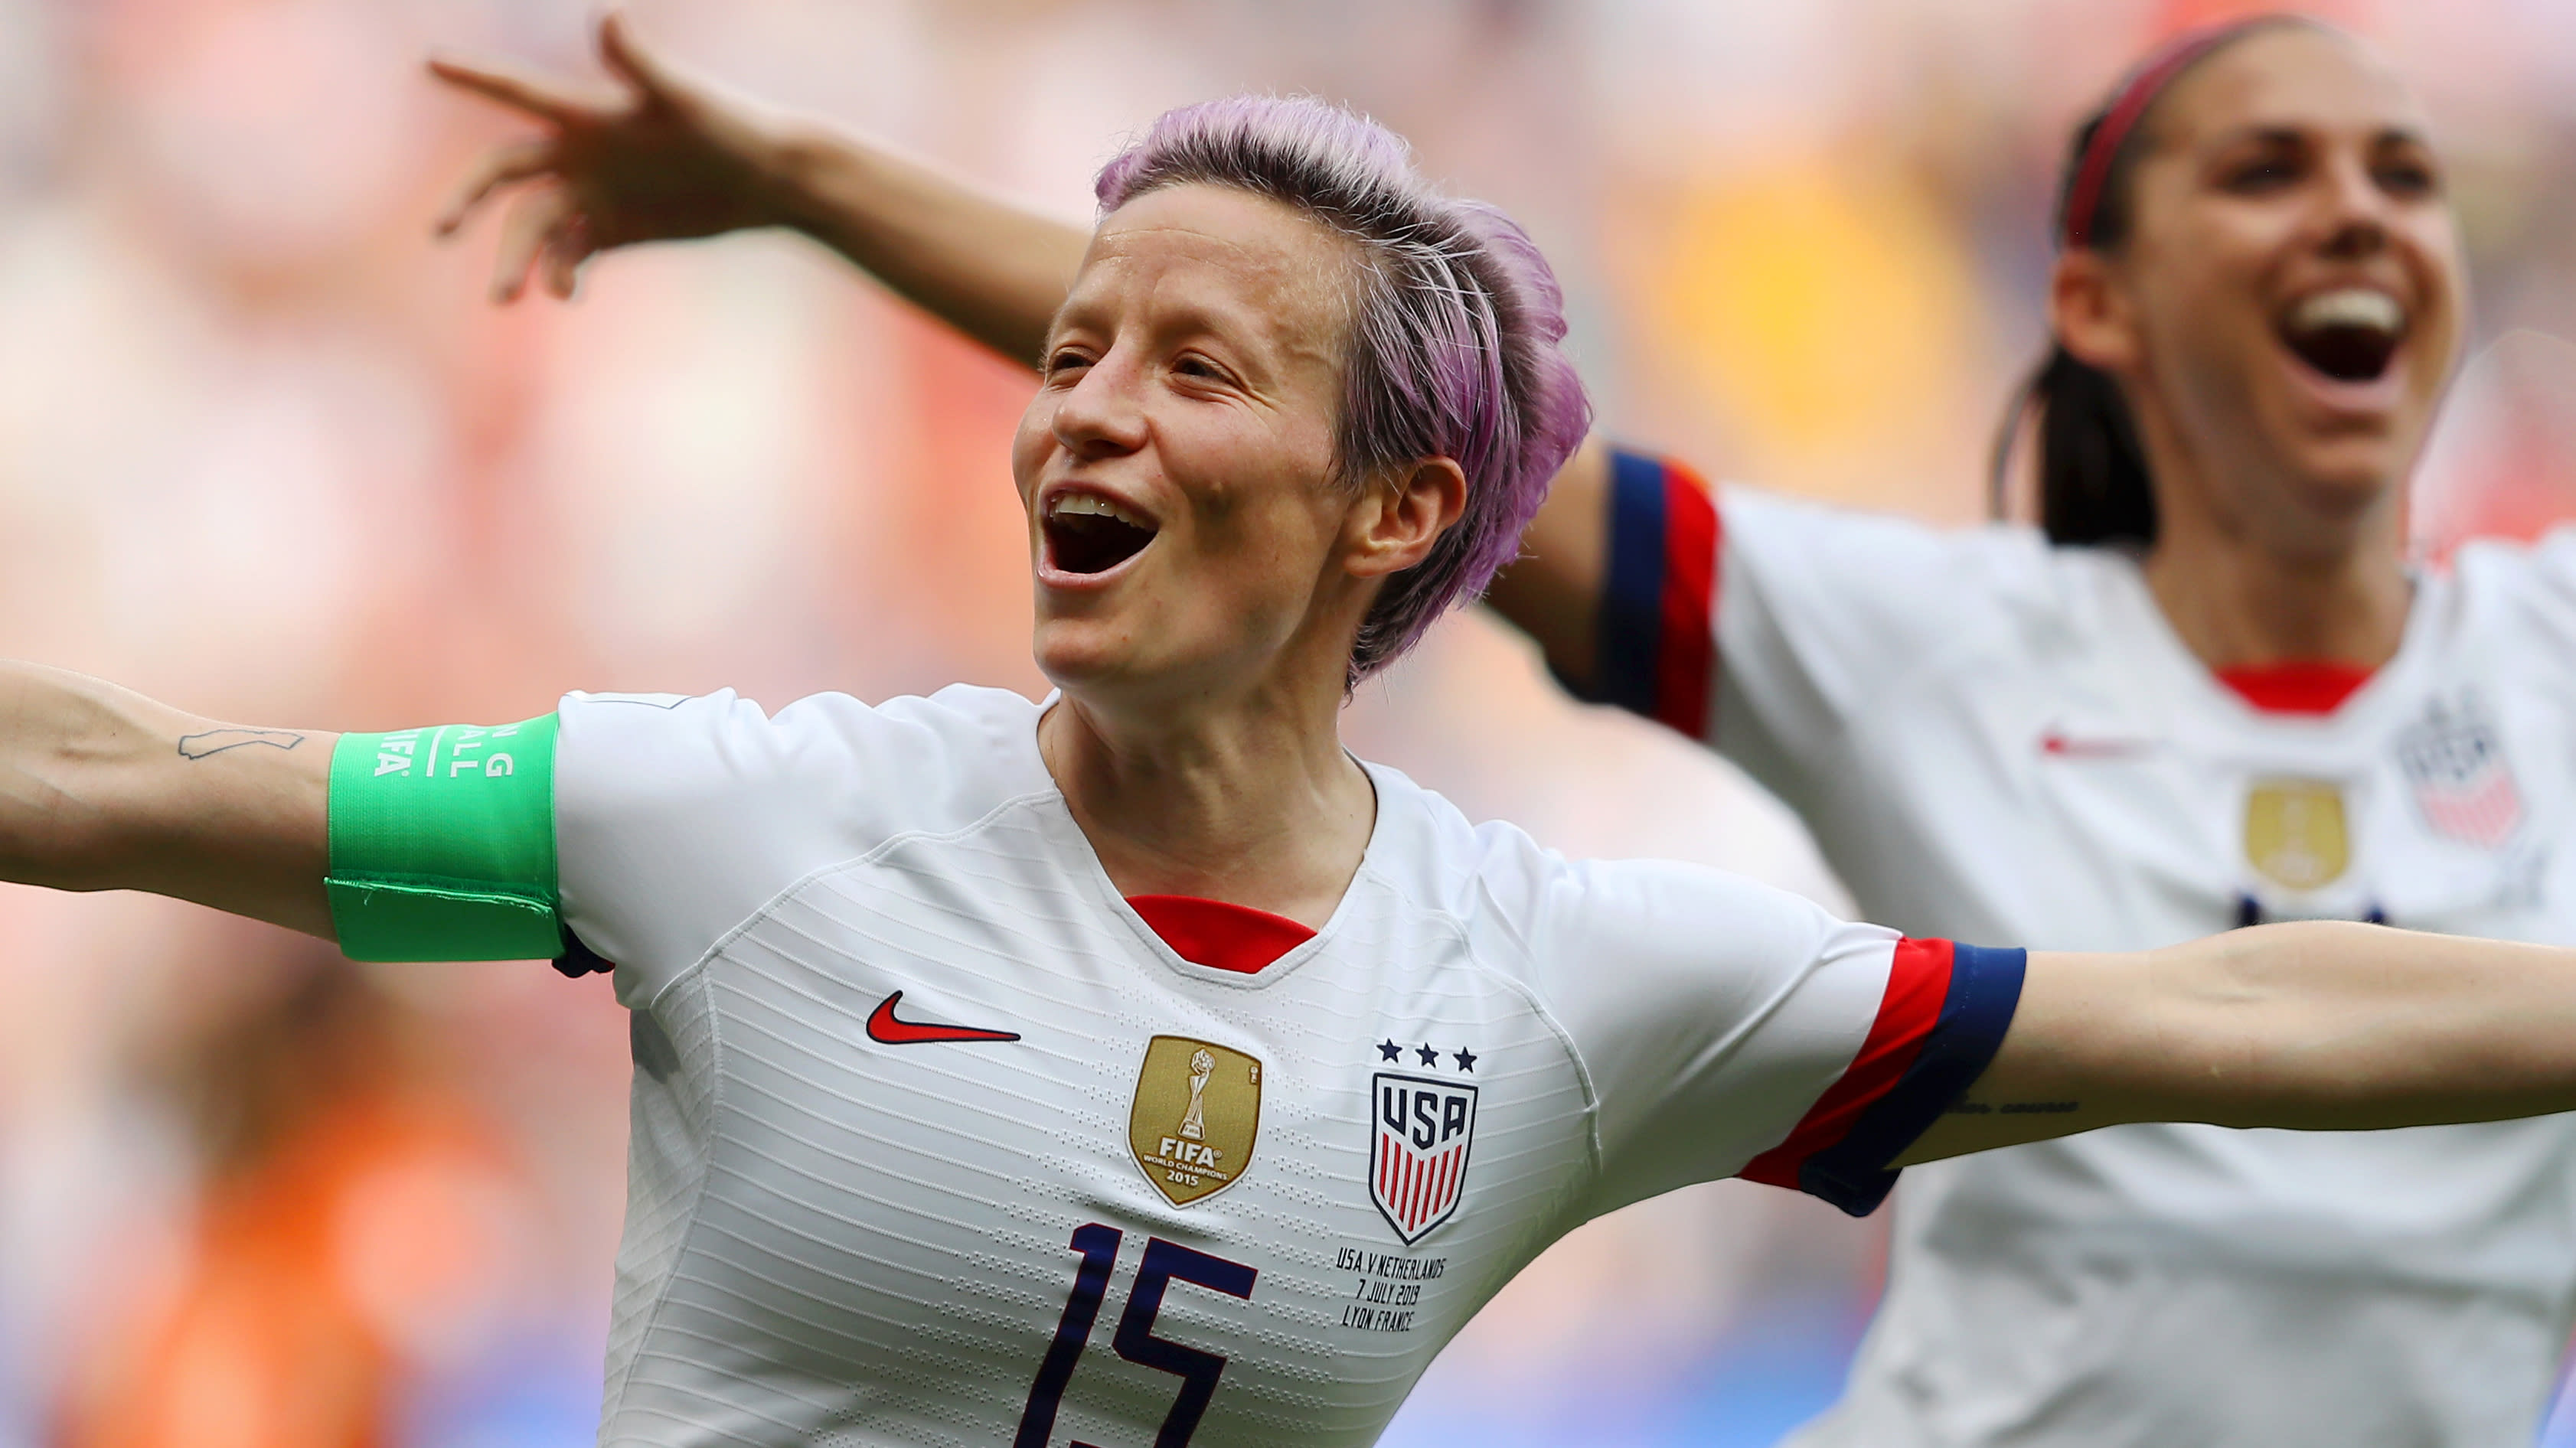 USWNT beats Wales 2-0 behind Trinity Rodman brace in World Cup send-off  match - SoccerWire